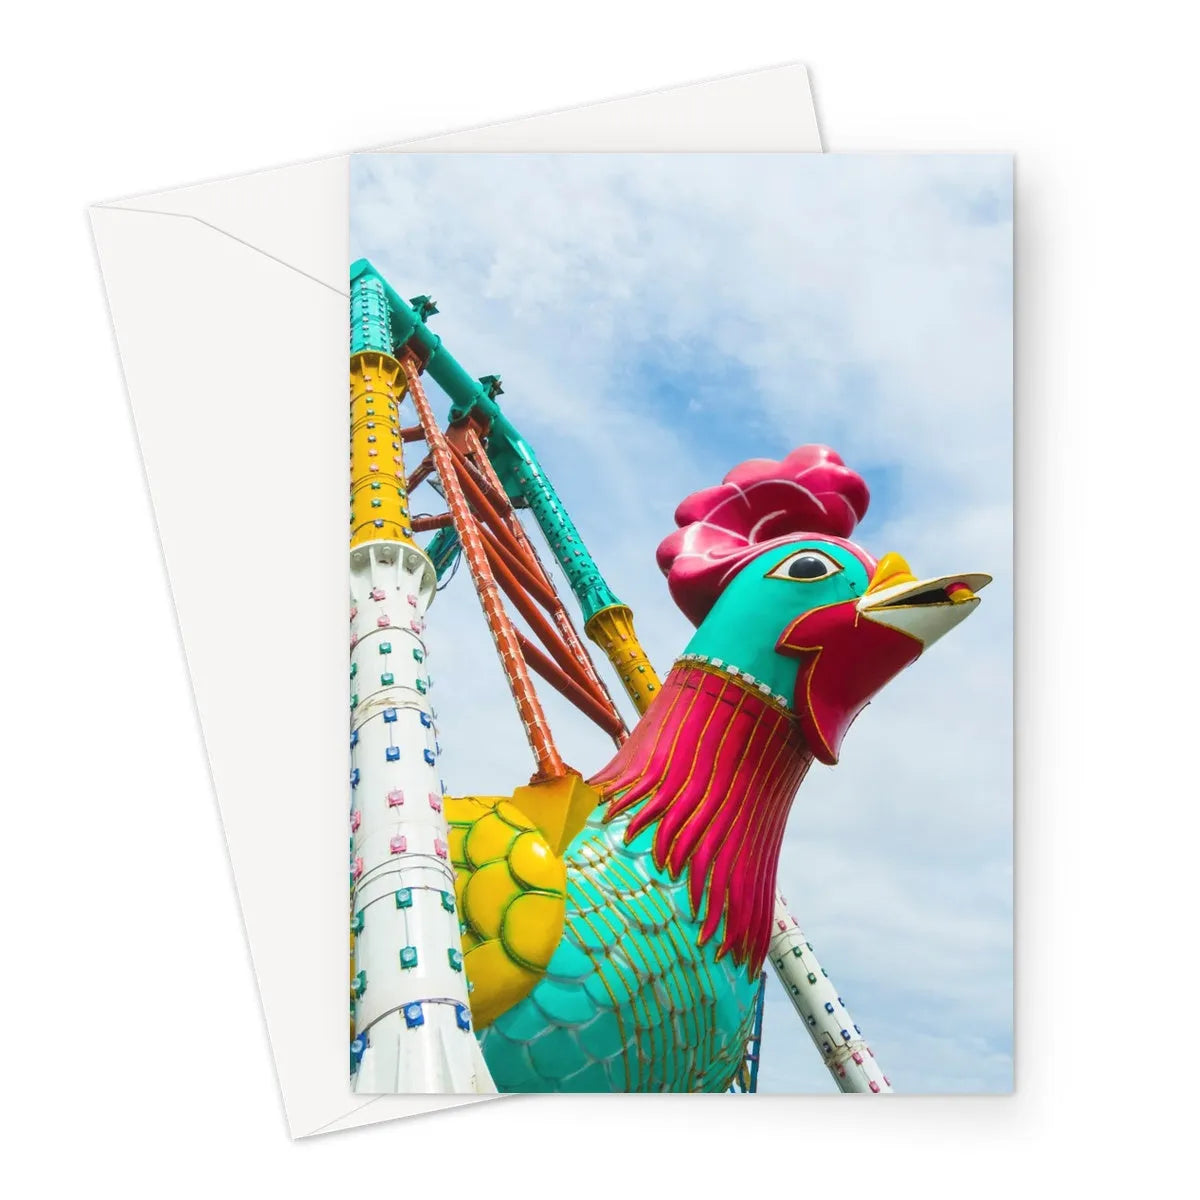 Rise And Shine Greeting Card - A5 Portrait / 10 Cards - Greeting & Note Cards - Aesthetic Art